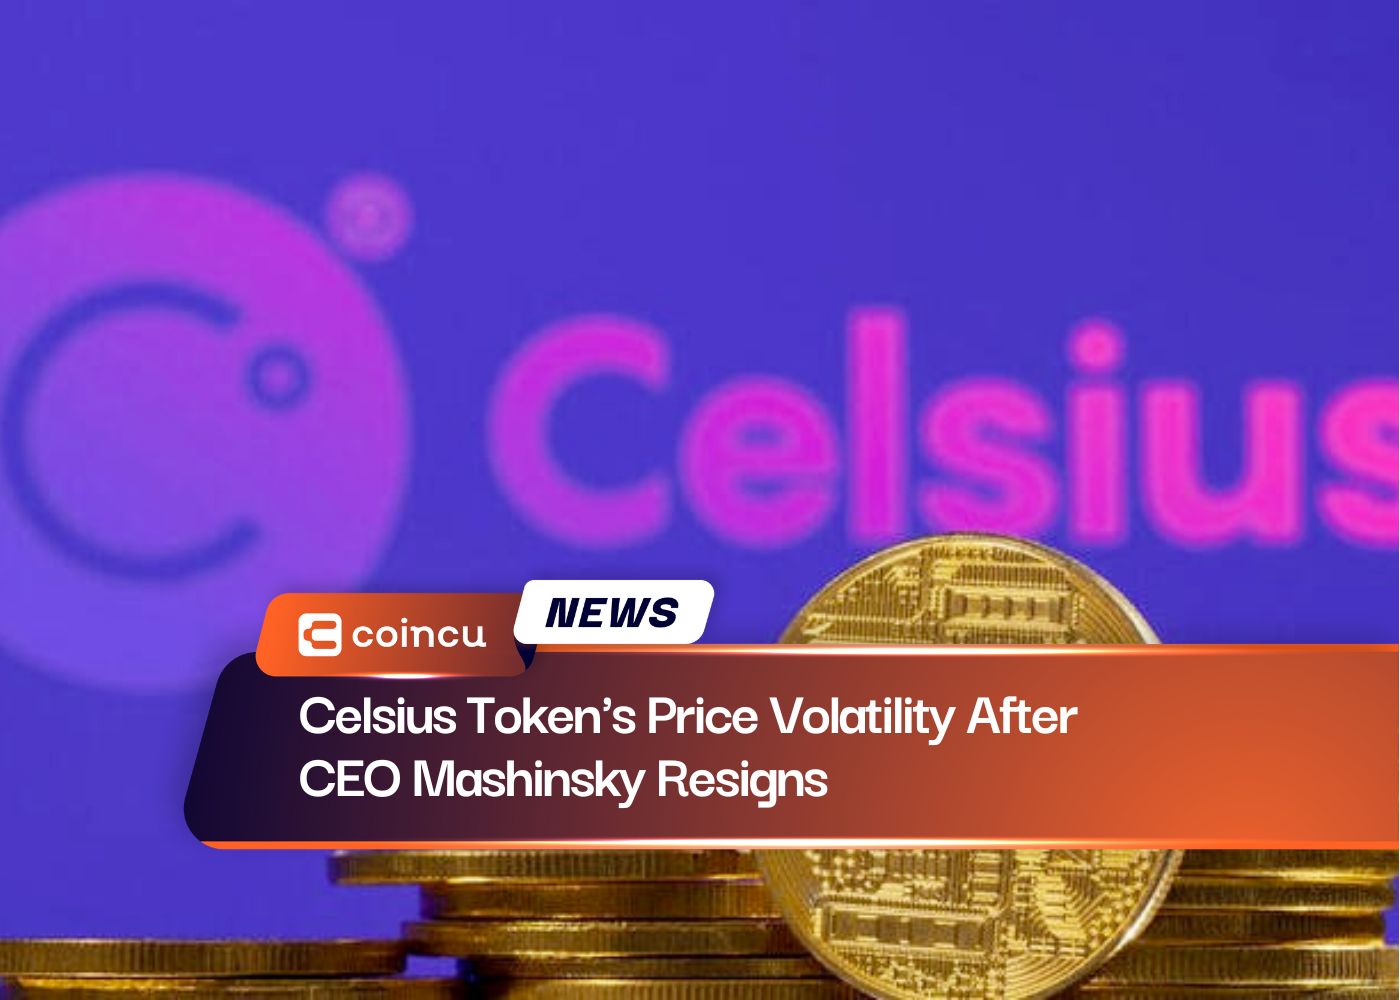 Celsius Token's Price Volatility After CEO Mashinsky Resigns